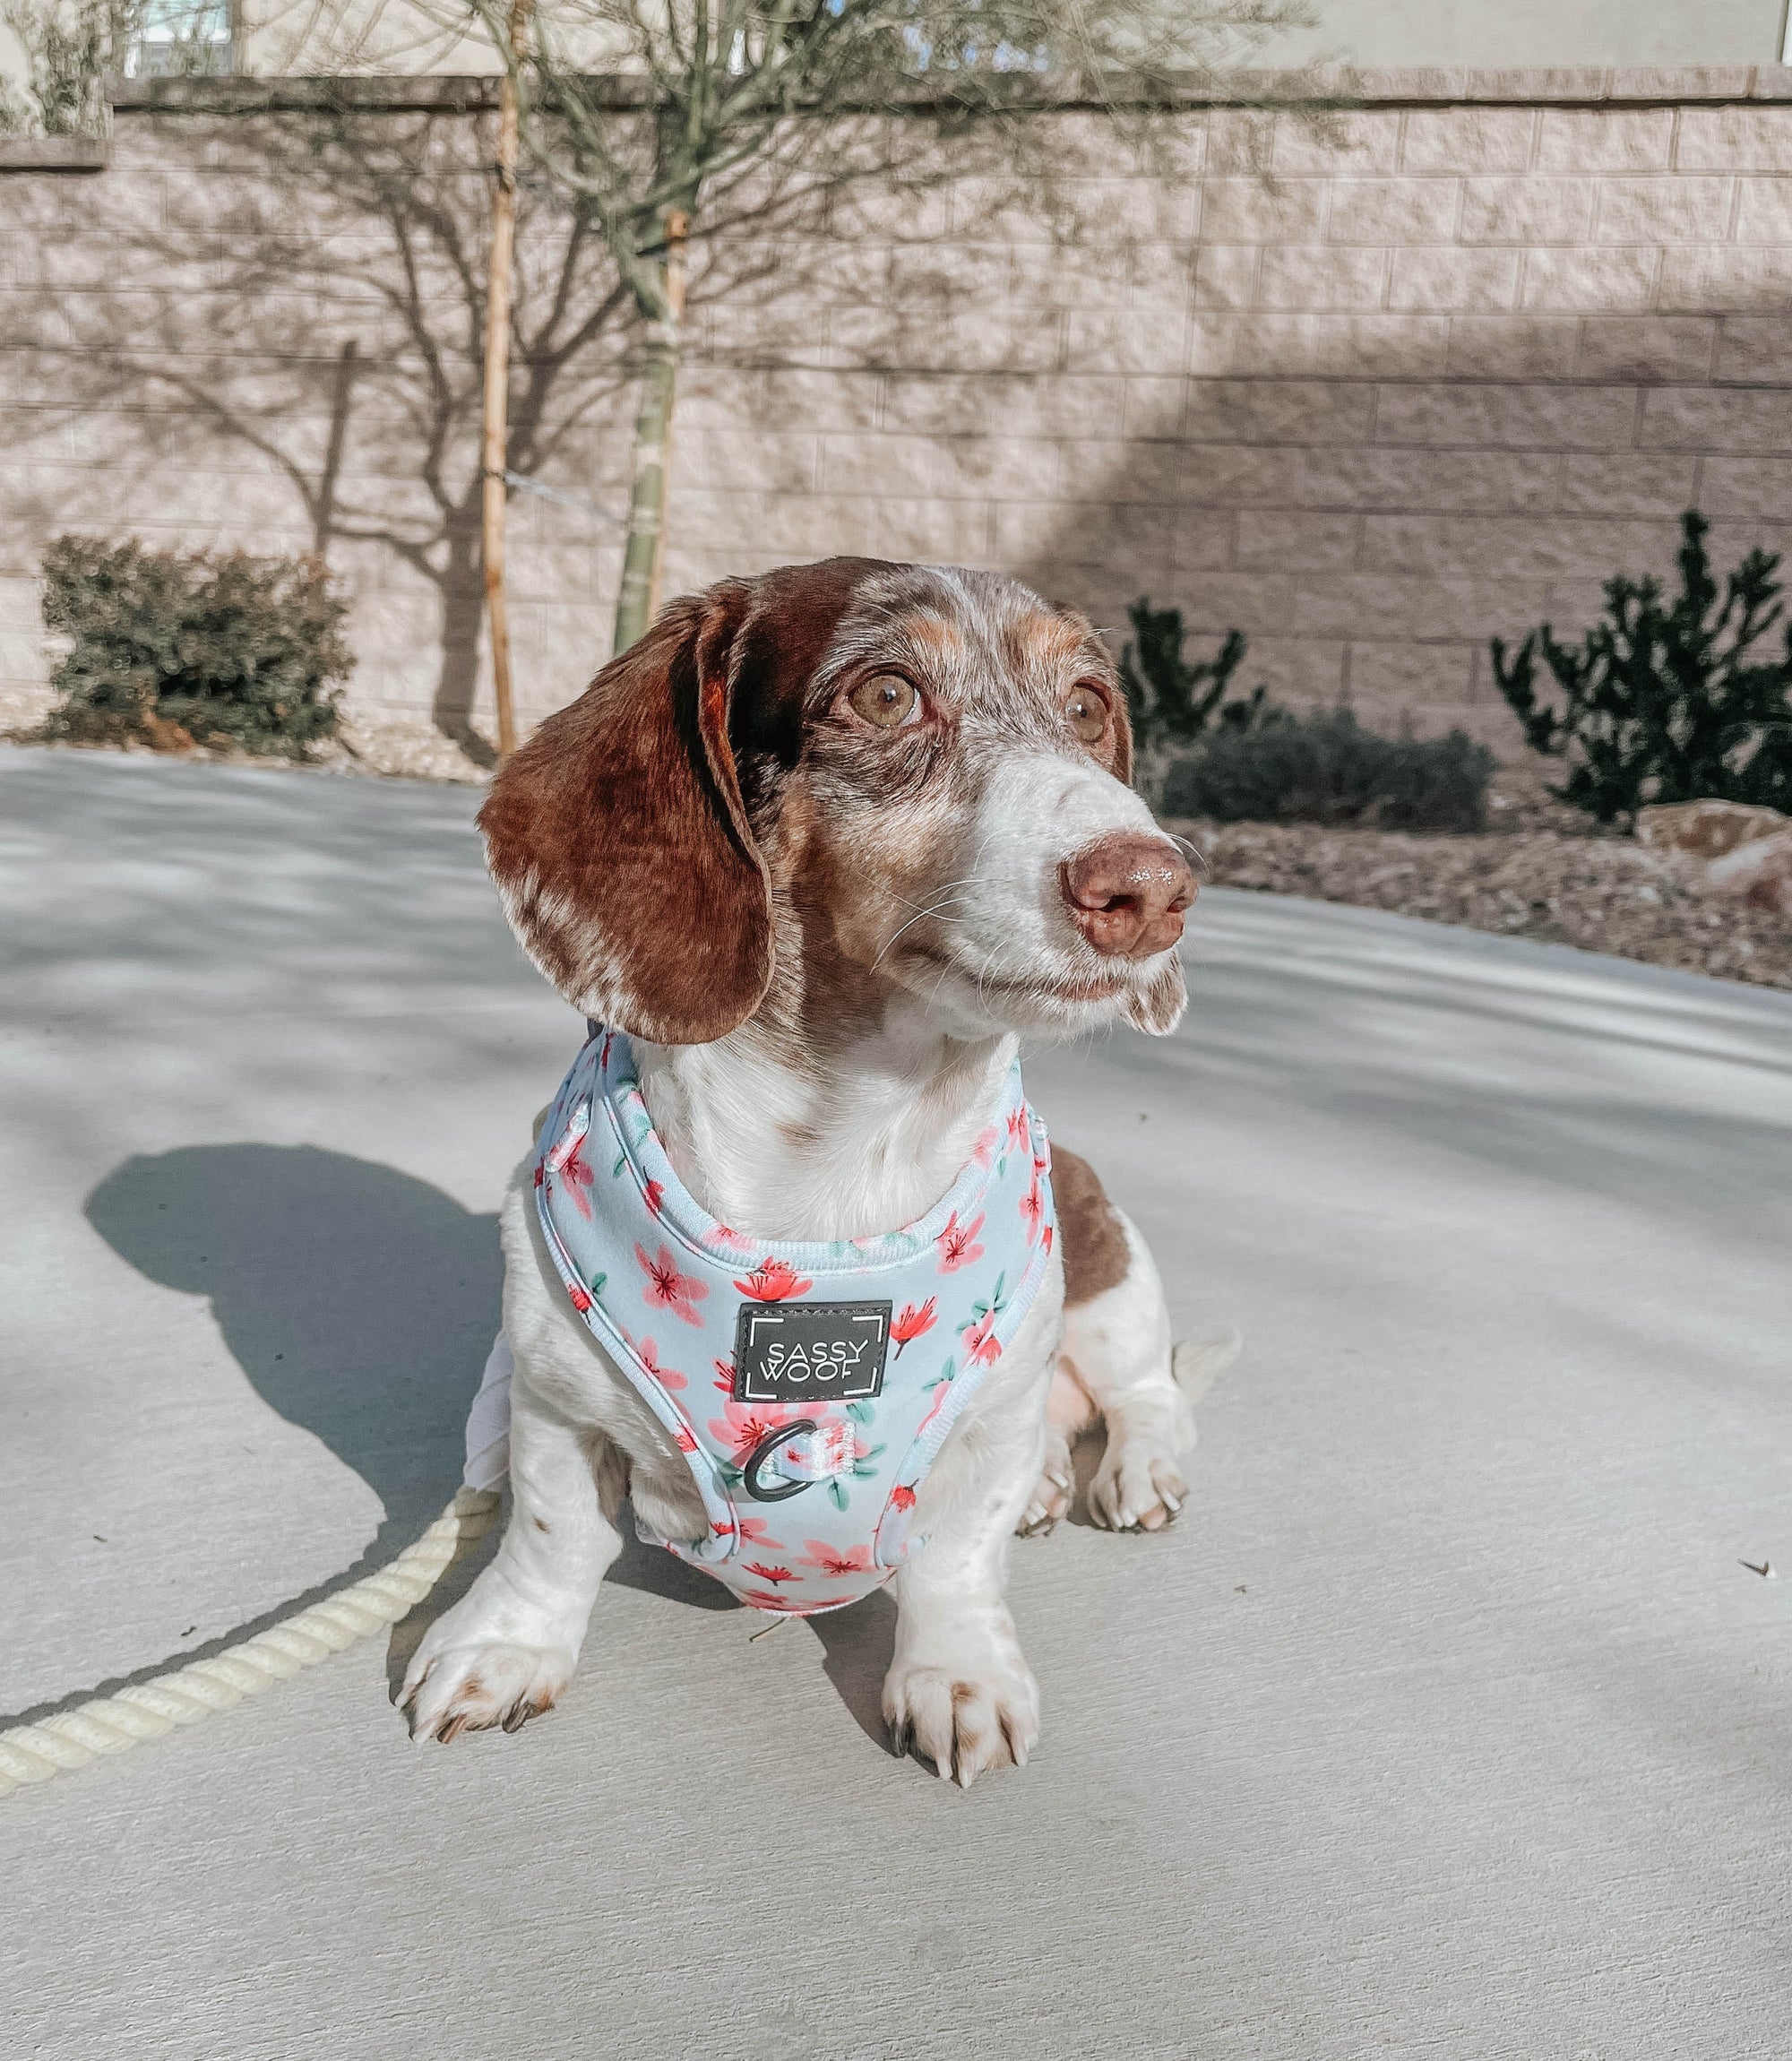 INFLUENCER_CONTENT | @AUGIEANDLILAH.DOXIES